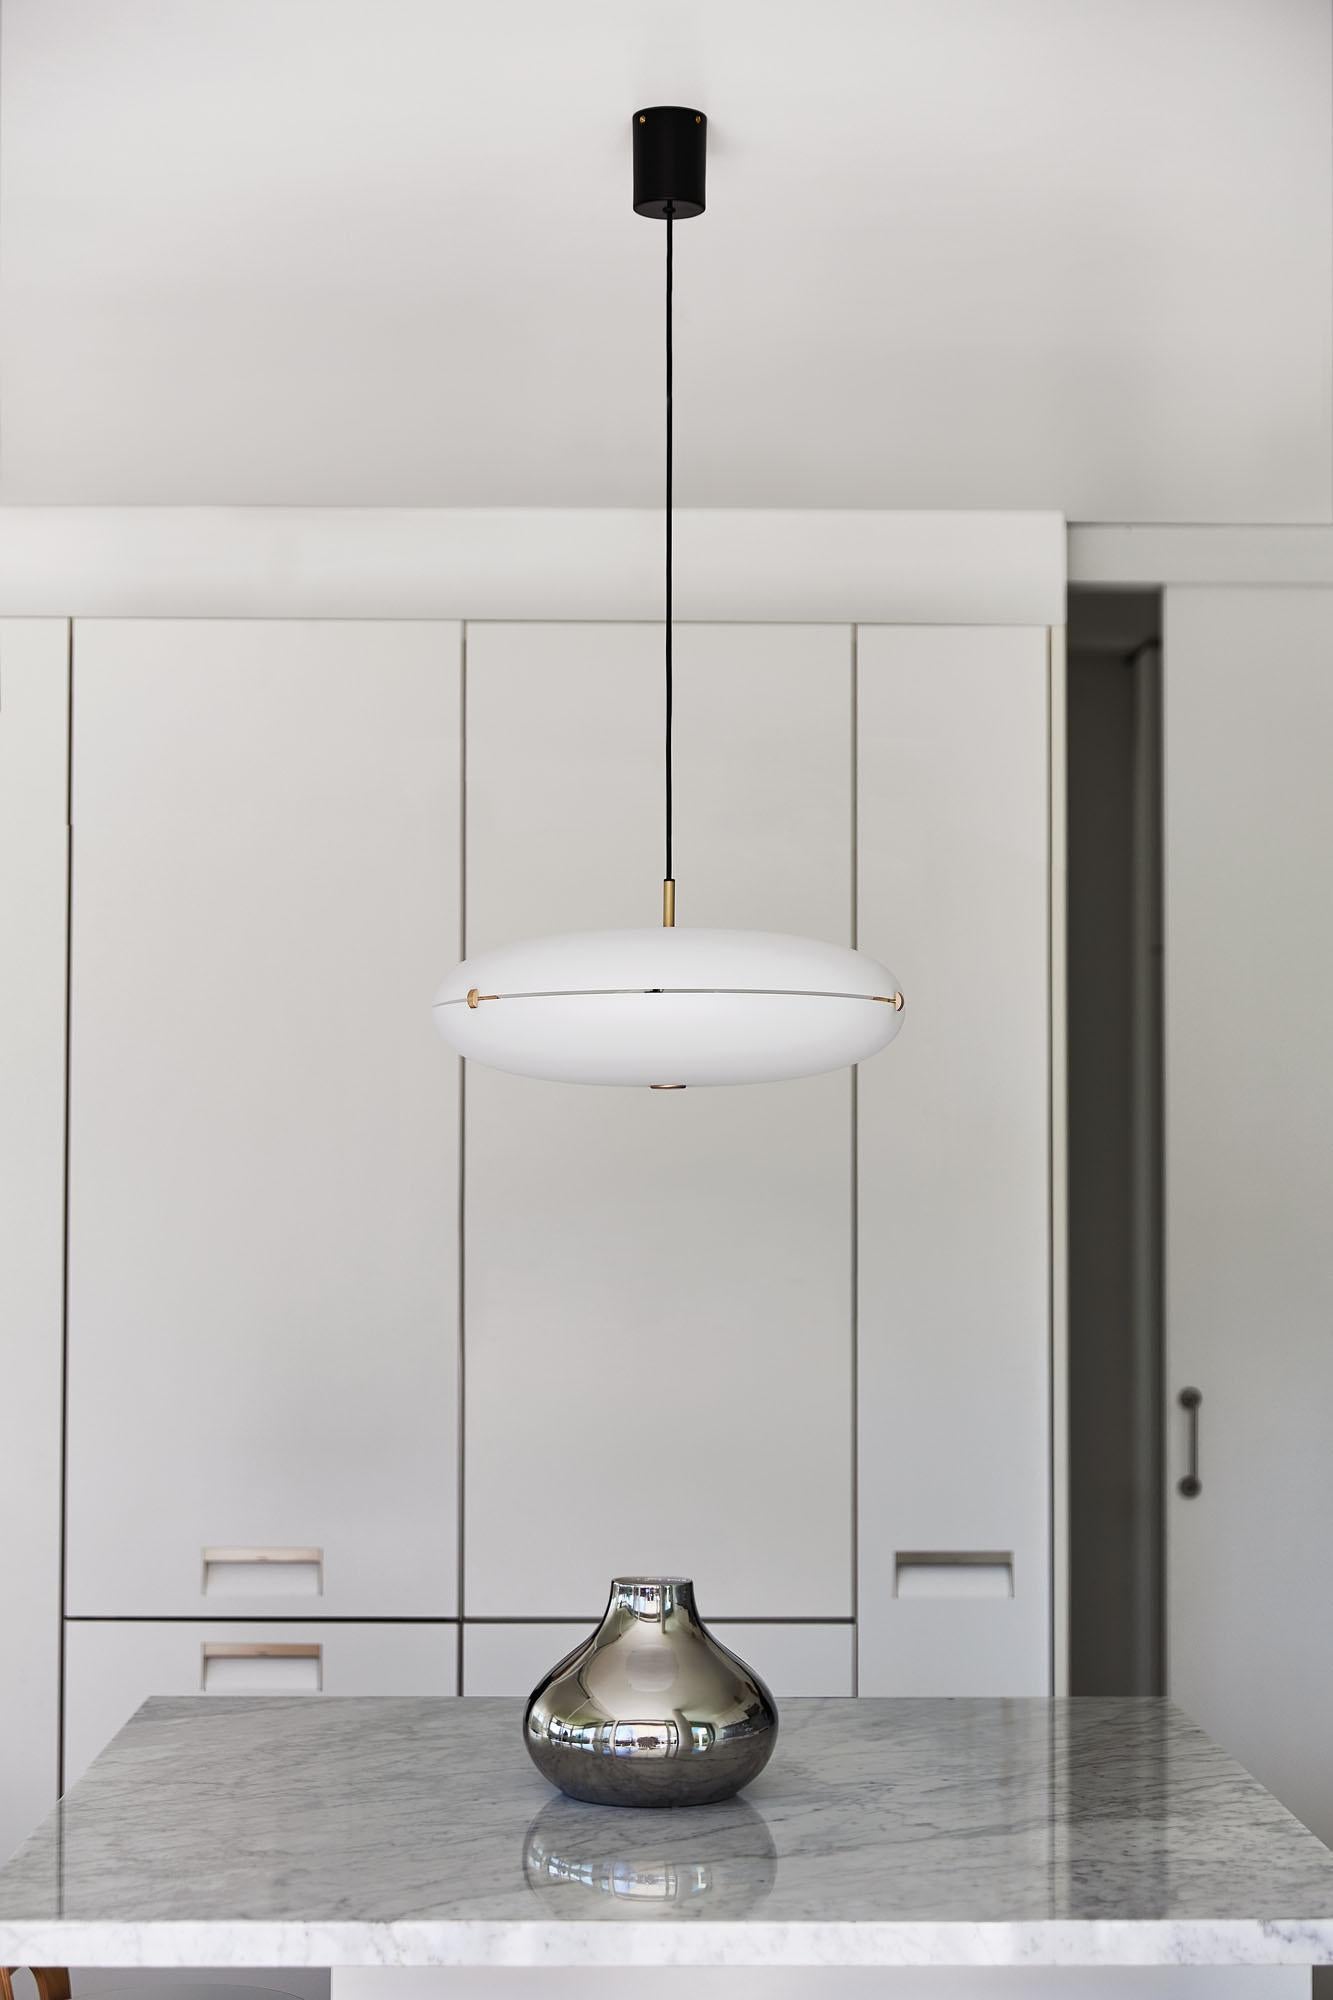 Pendant lamp with polycarbonate shade and brass metallic accents in various finishings, designed by Gio Ponti and re-edited by TATO since 2017.
Bulbs: 3xLED E27-220V or E26-110V (not included).
Junction box additional cover available upon request